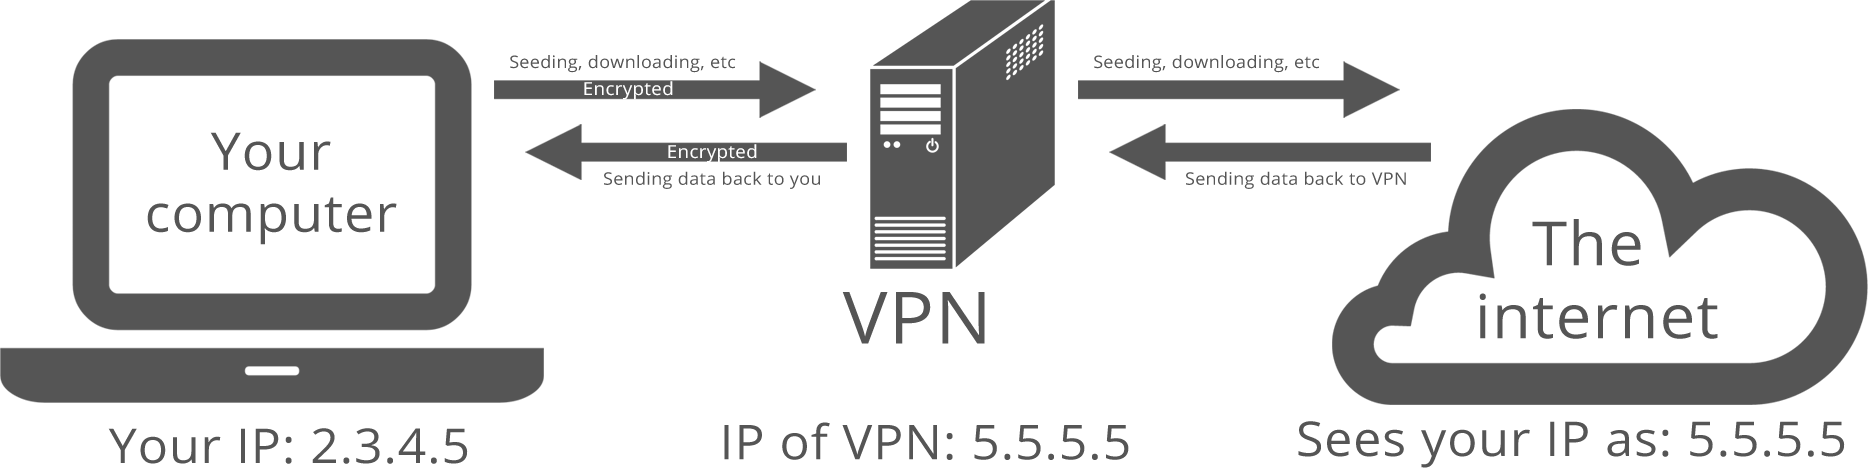 With VPN